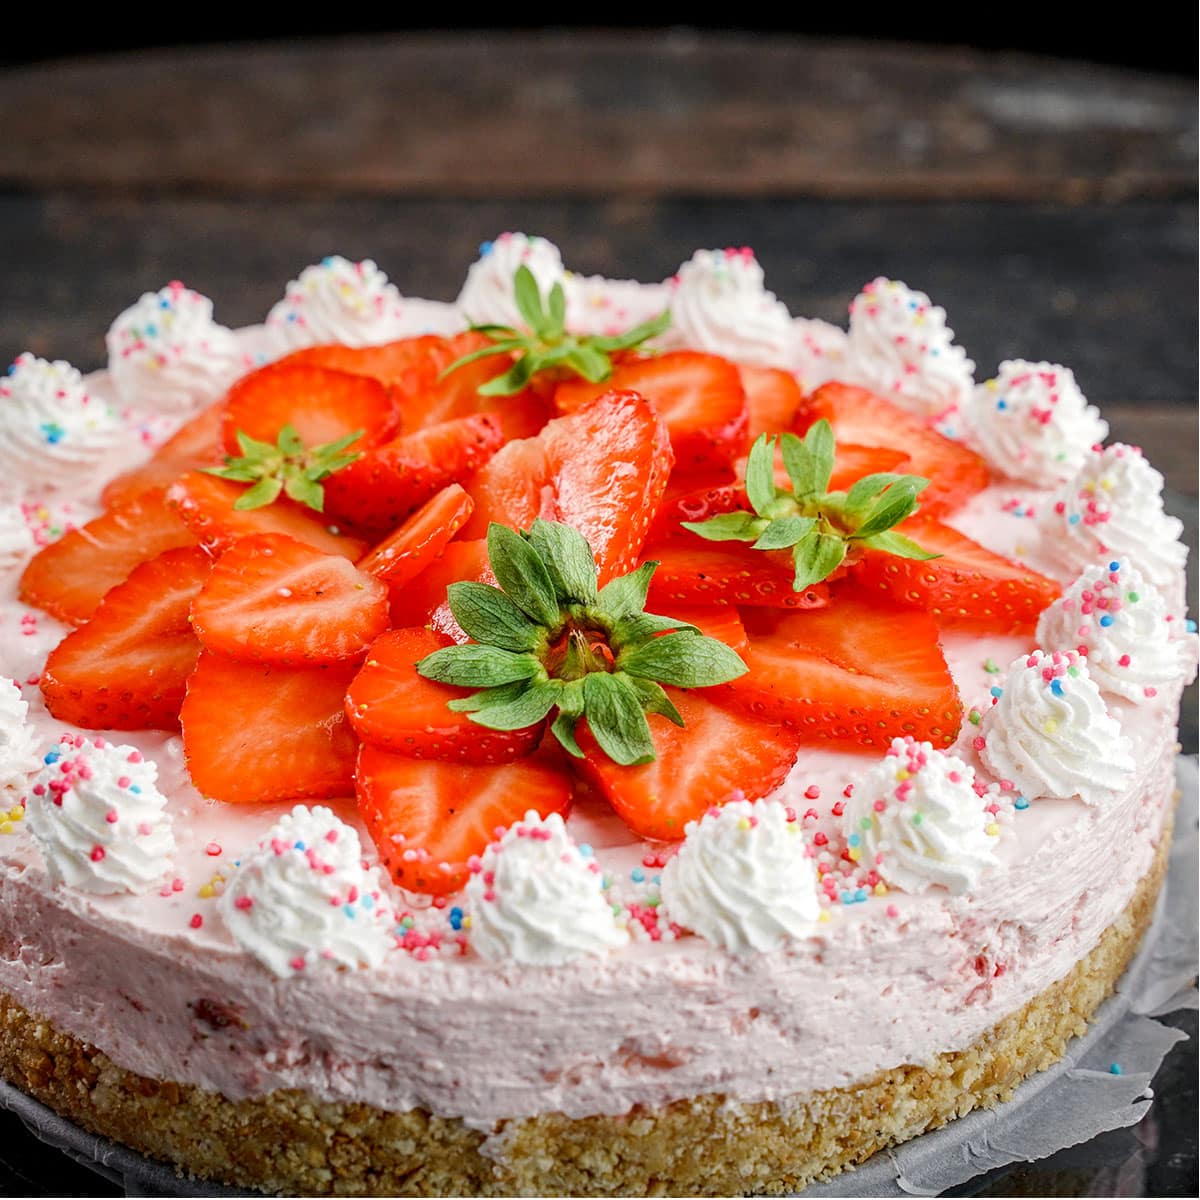 Sliced Strawberries on top of Strawberry Cheesecake.